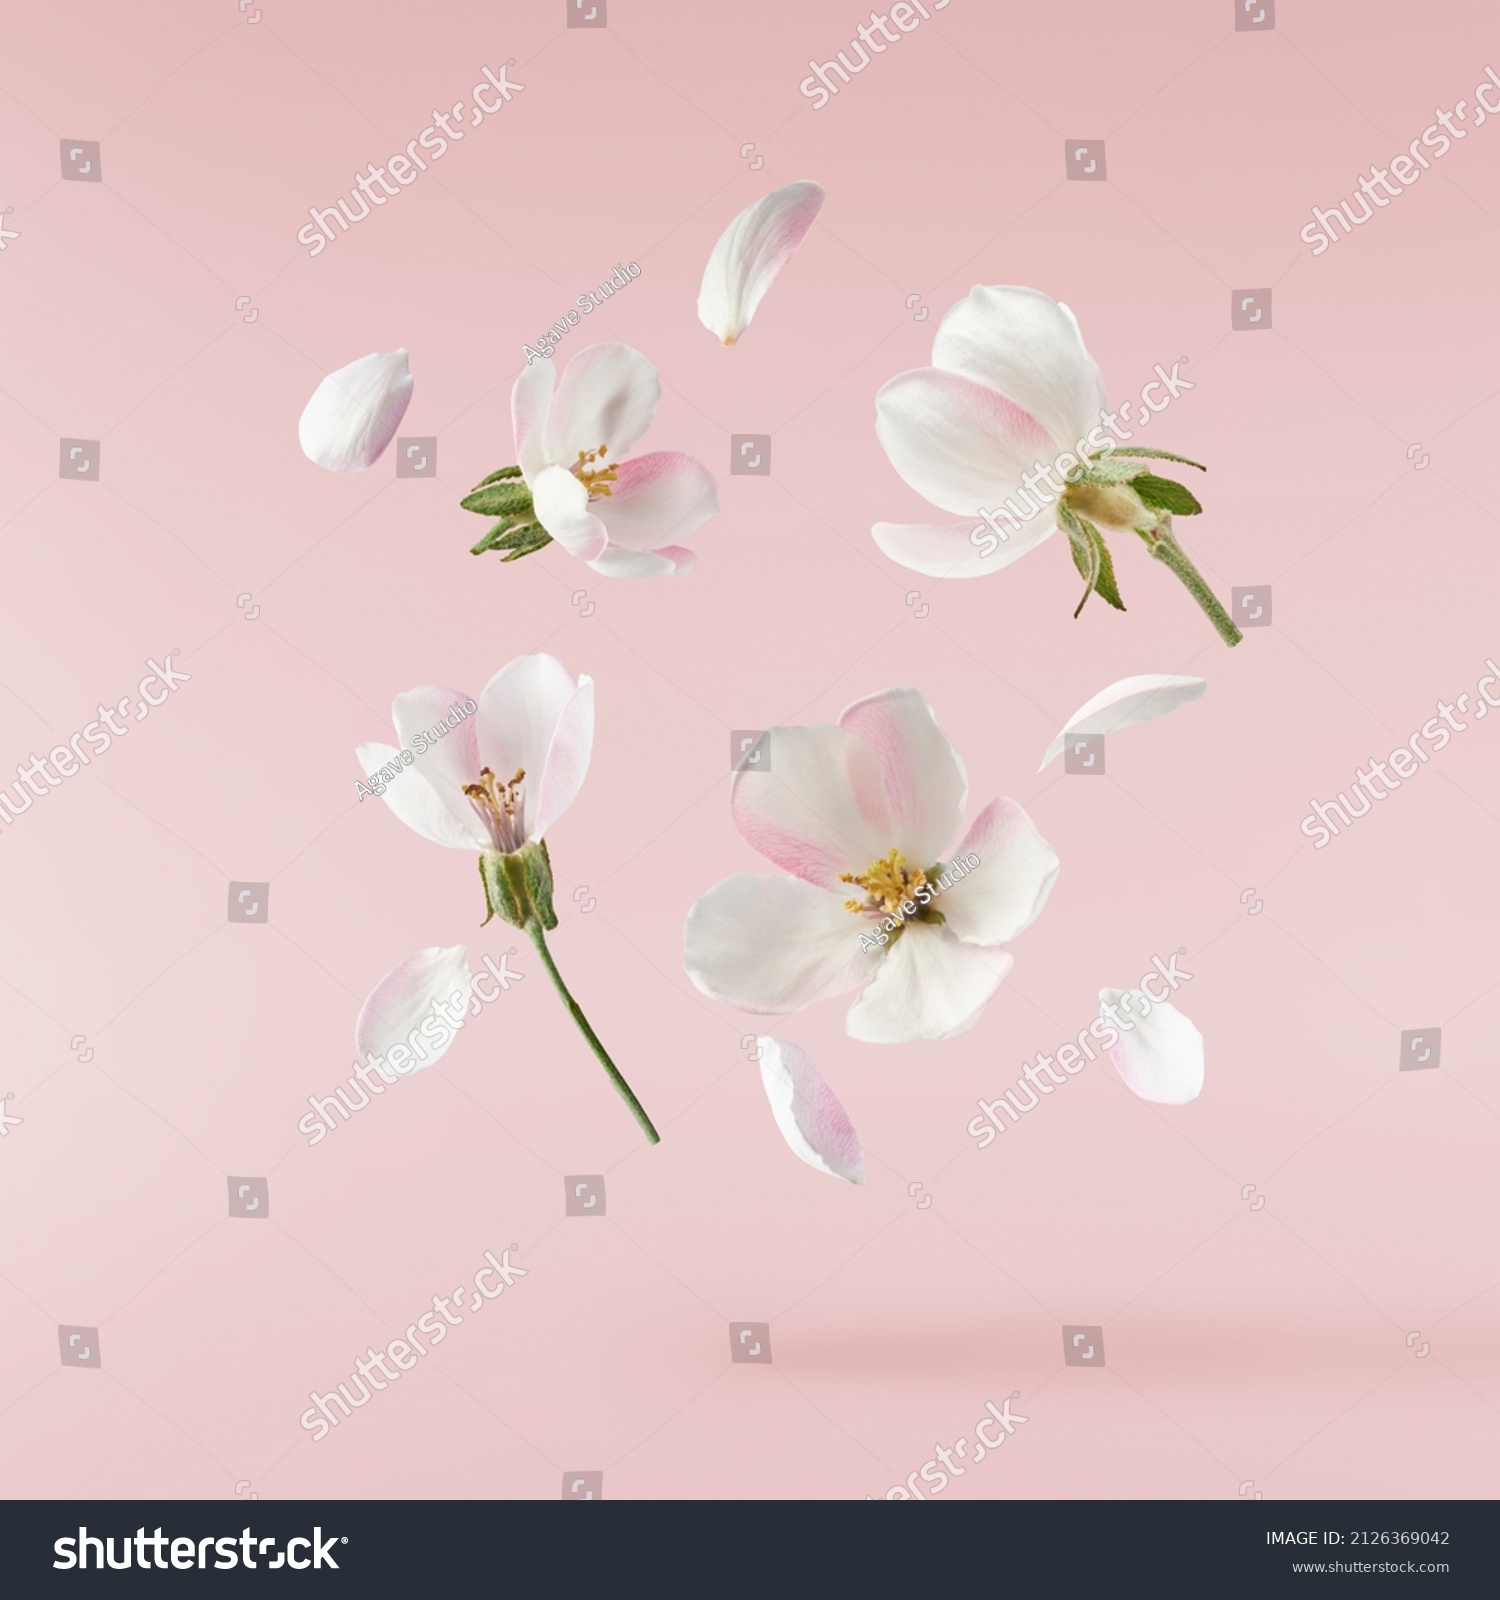 Fresh quince blossom, beautiful pink flowers falling in the air isolated on pink background. Zero gravity or levitation, spring flowers conception, high resolution image #2126369042